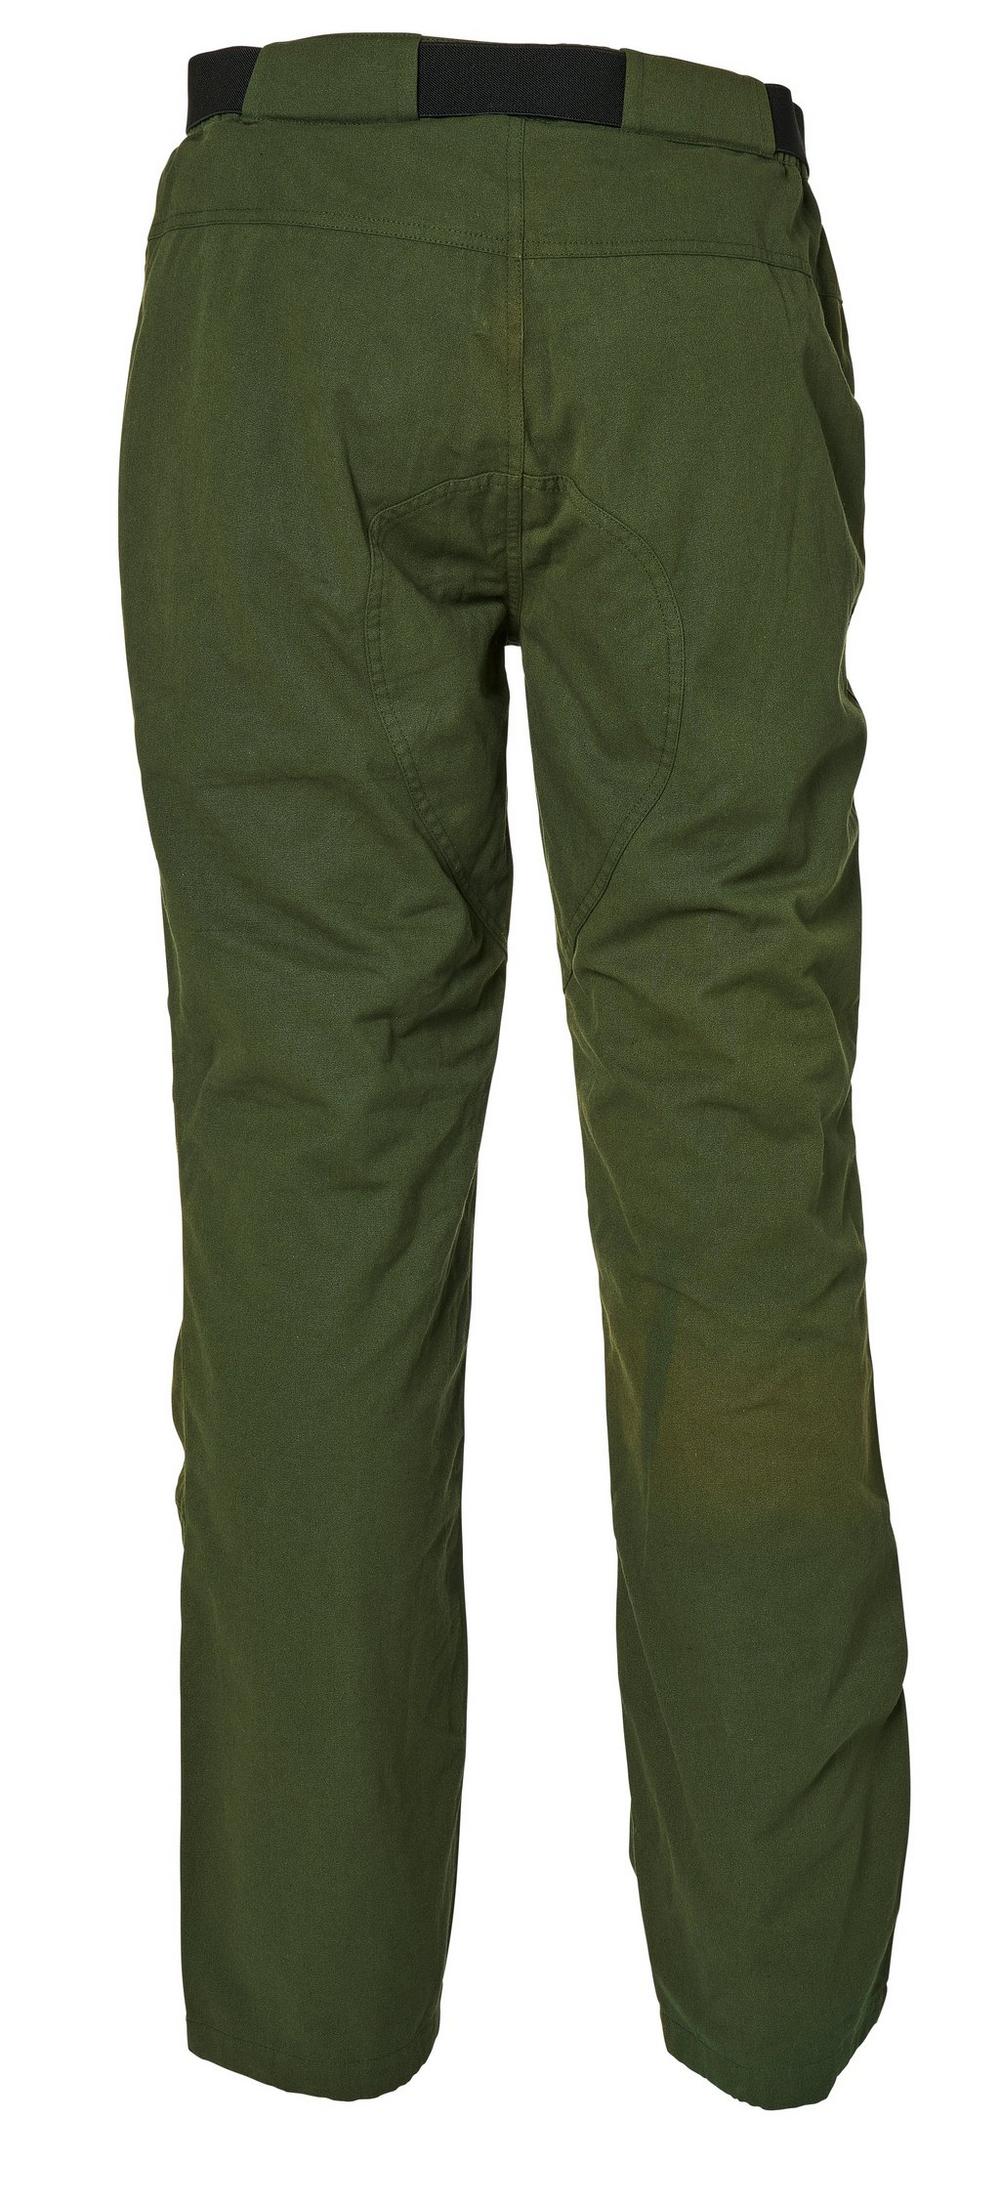 Prologic Combat Trousers Army Green Angelhose